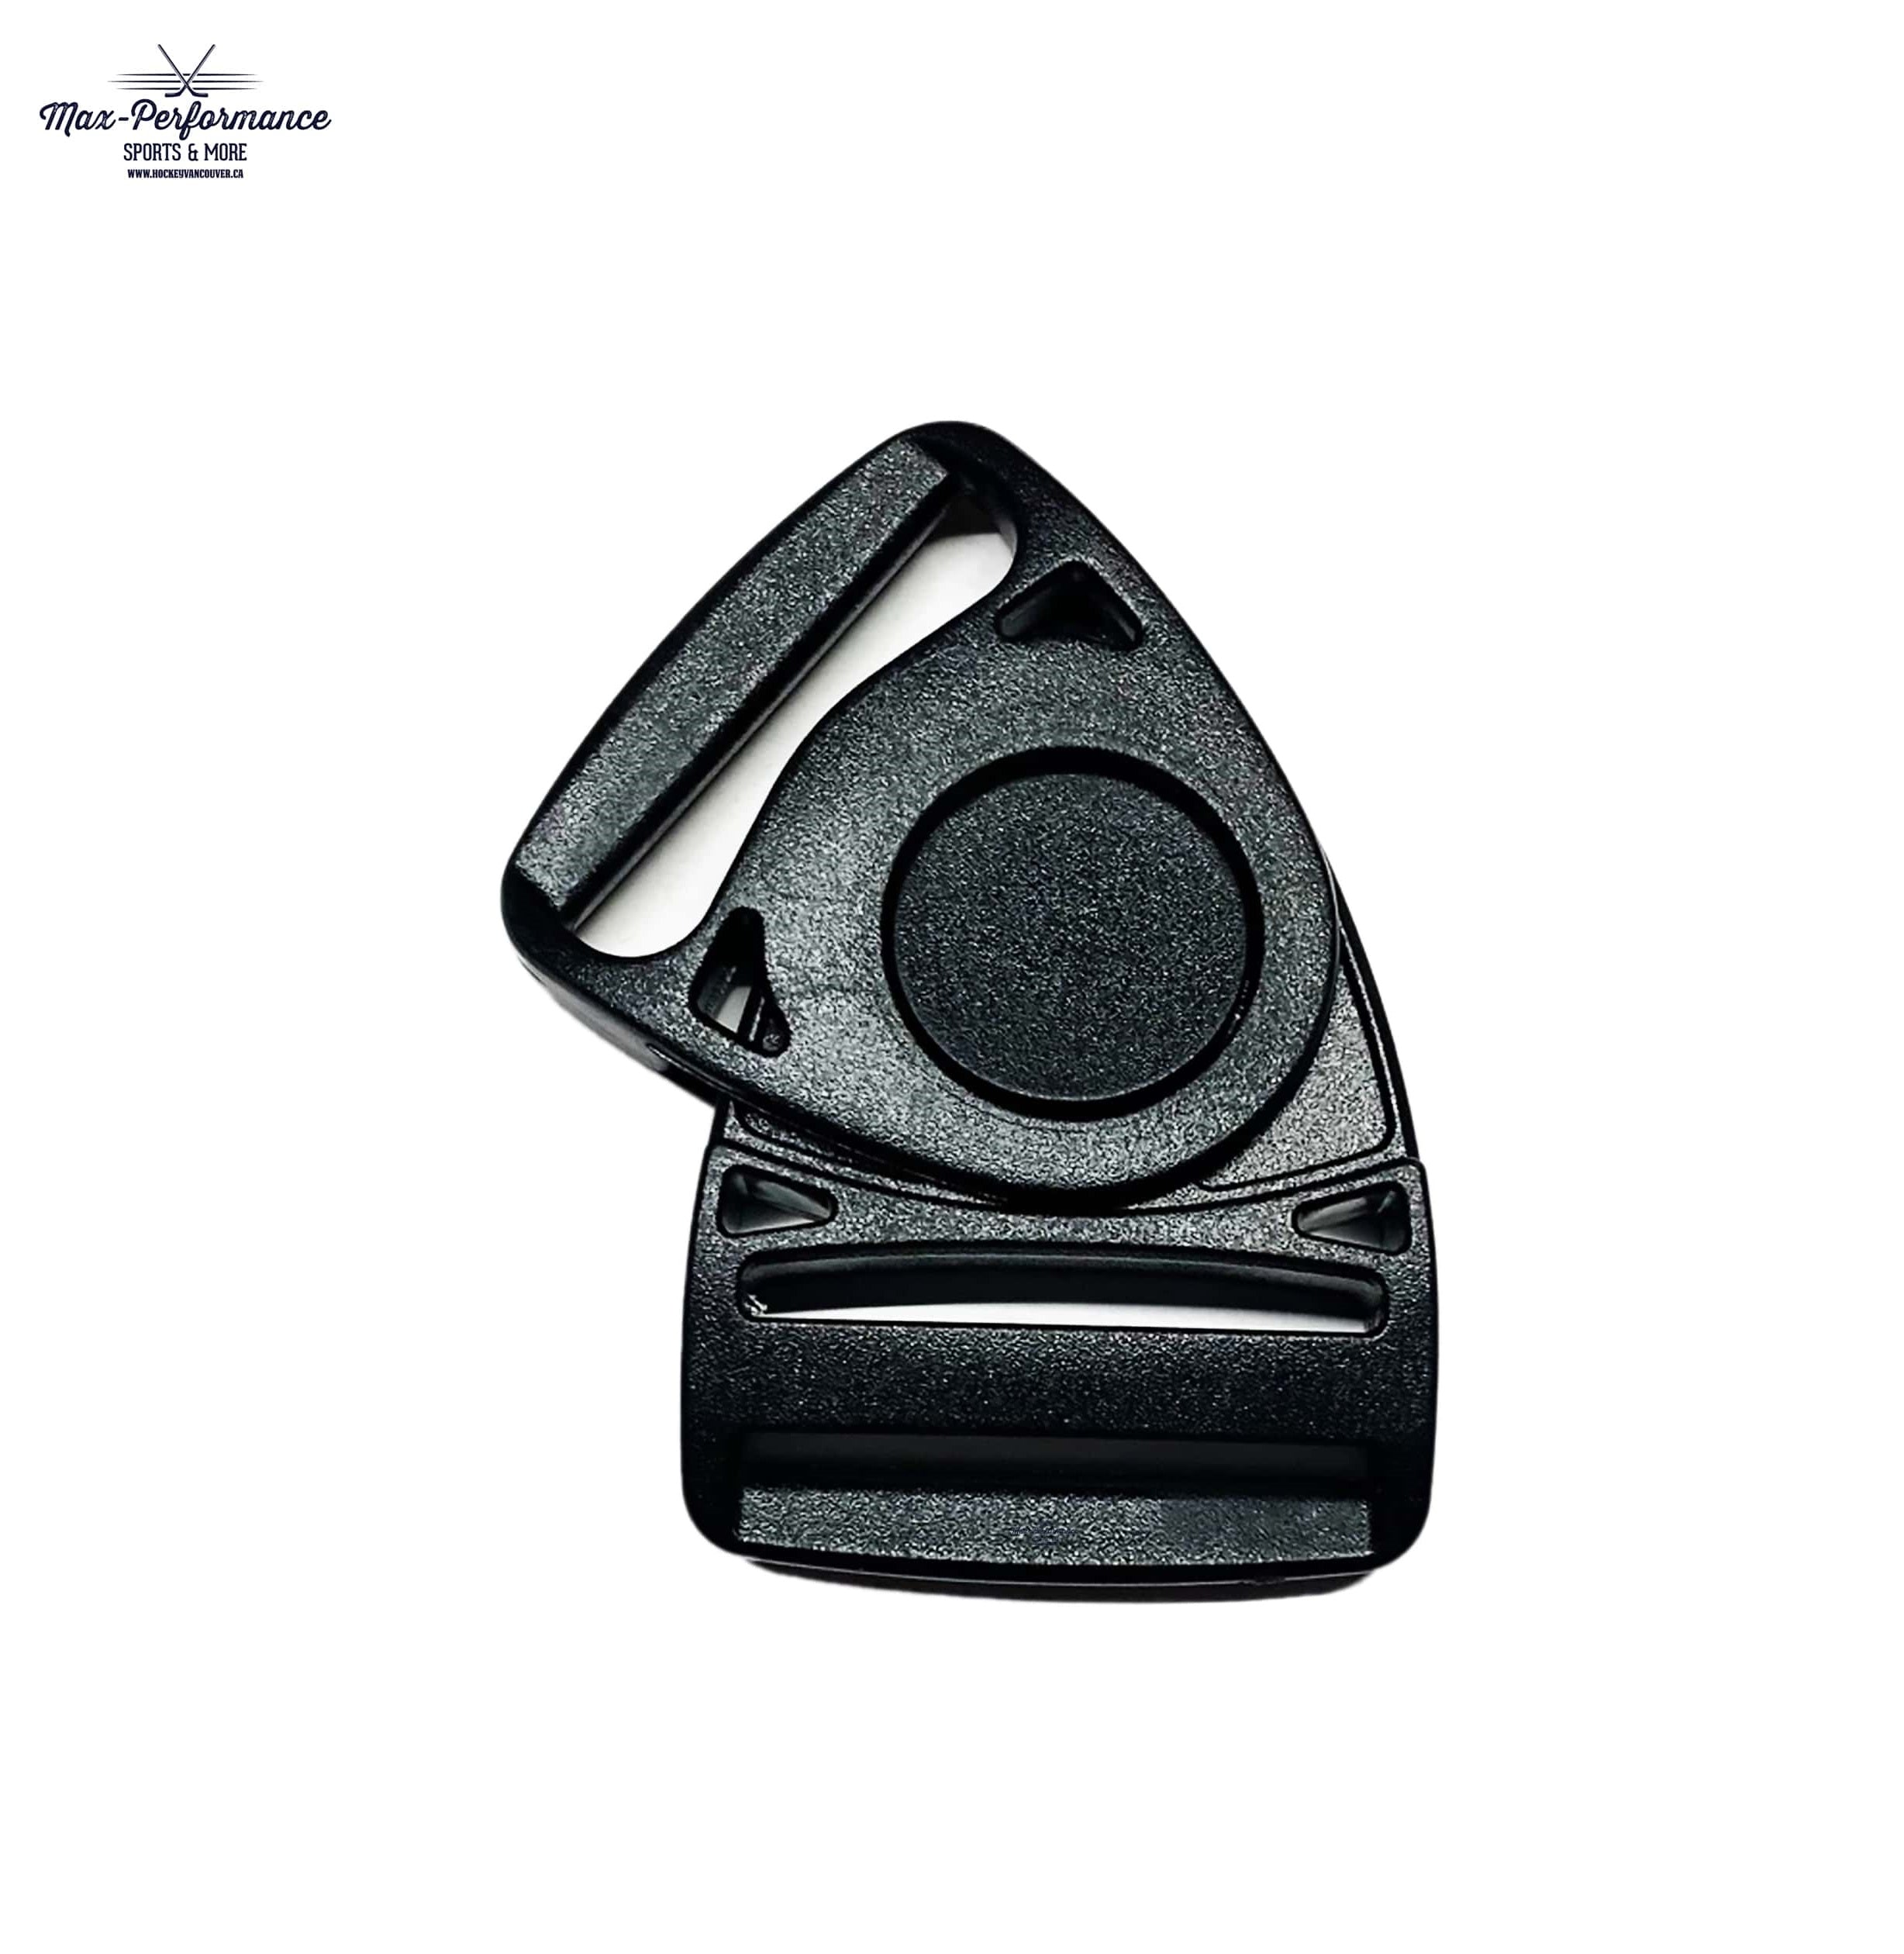 Vaughn SLR2 Chest Protector Replacement Buckle